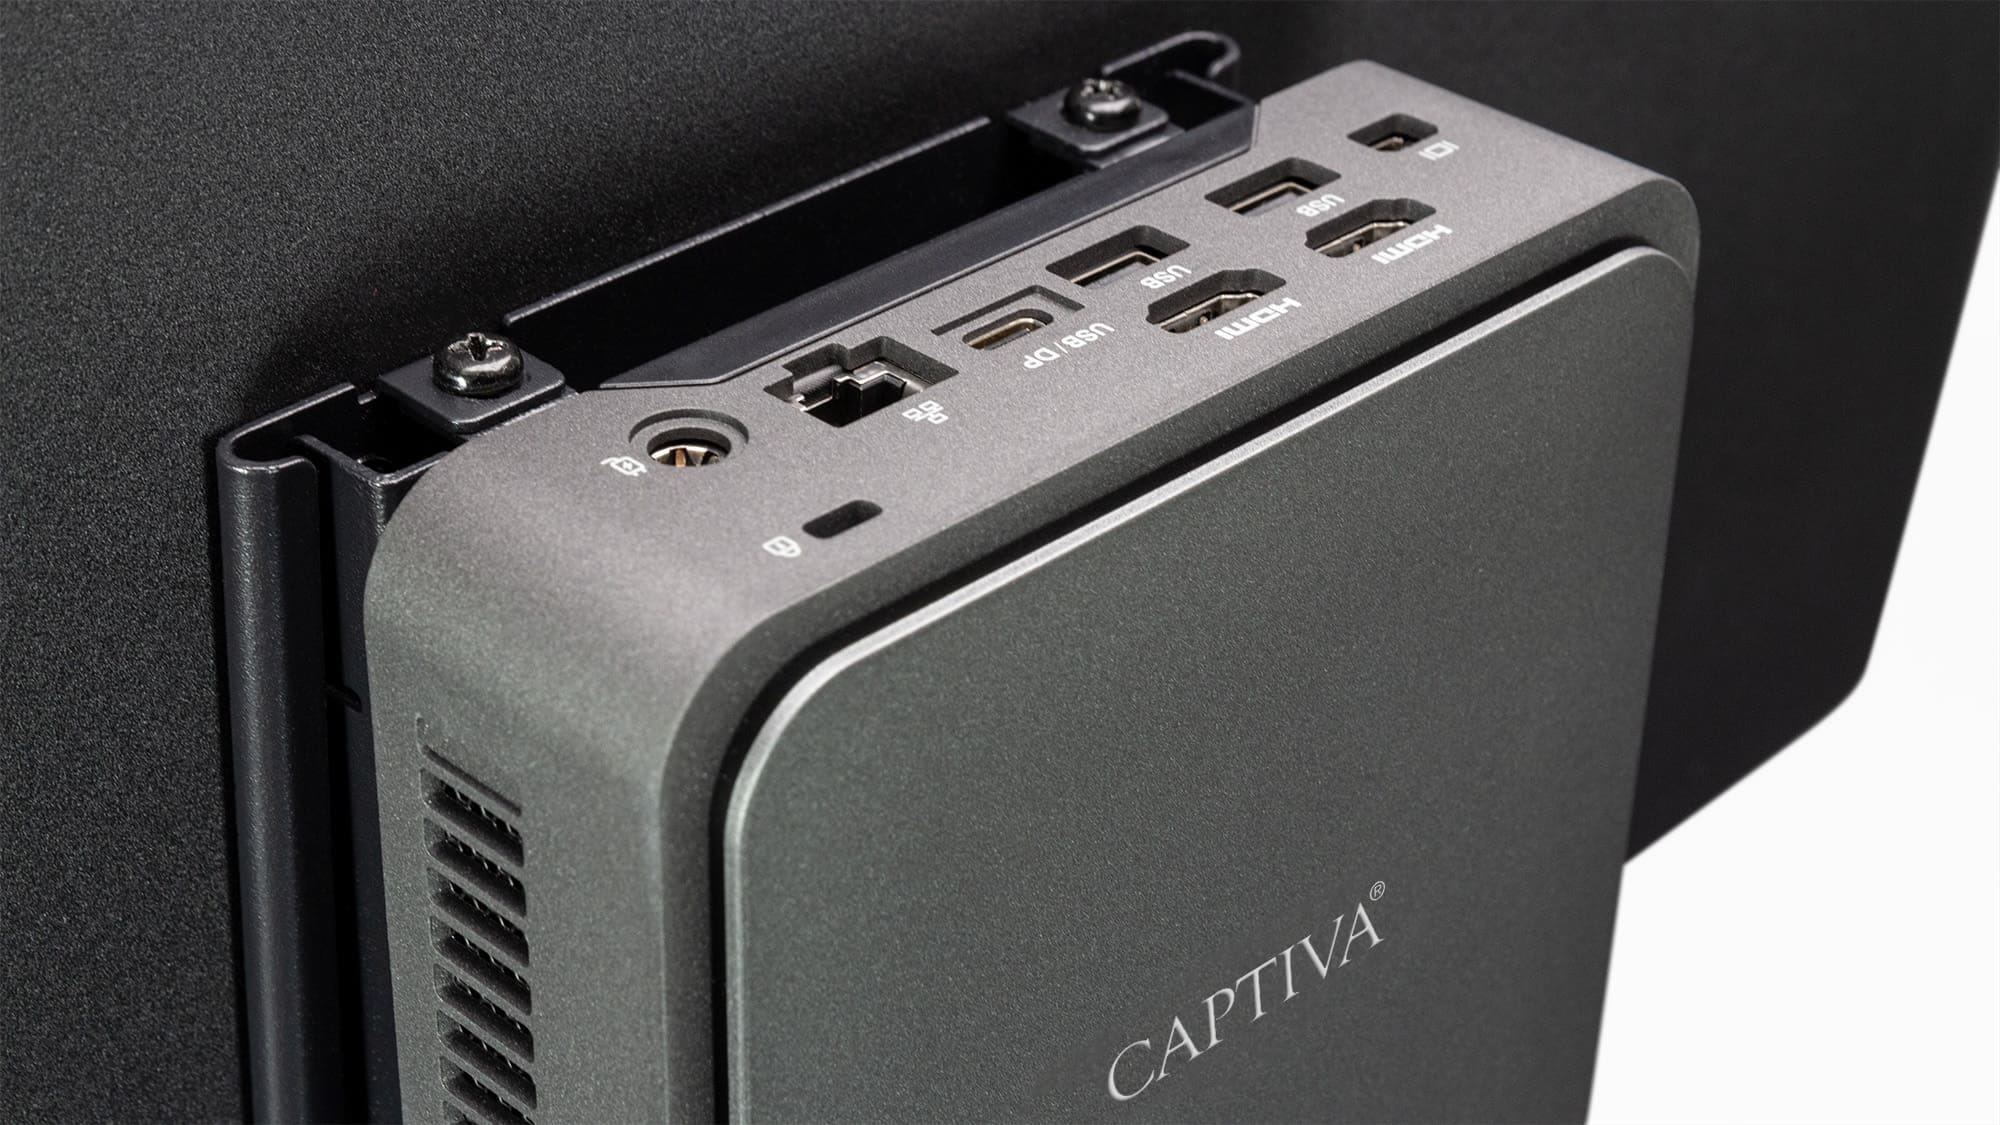 CAPTIVA All-in-One PC »All-In-One Power Starter I82-276«